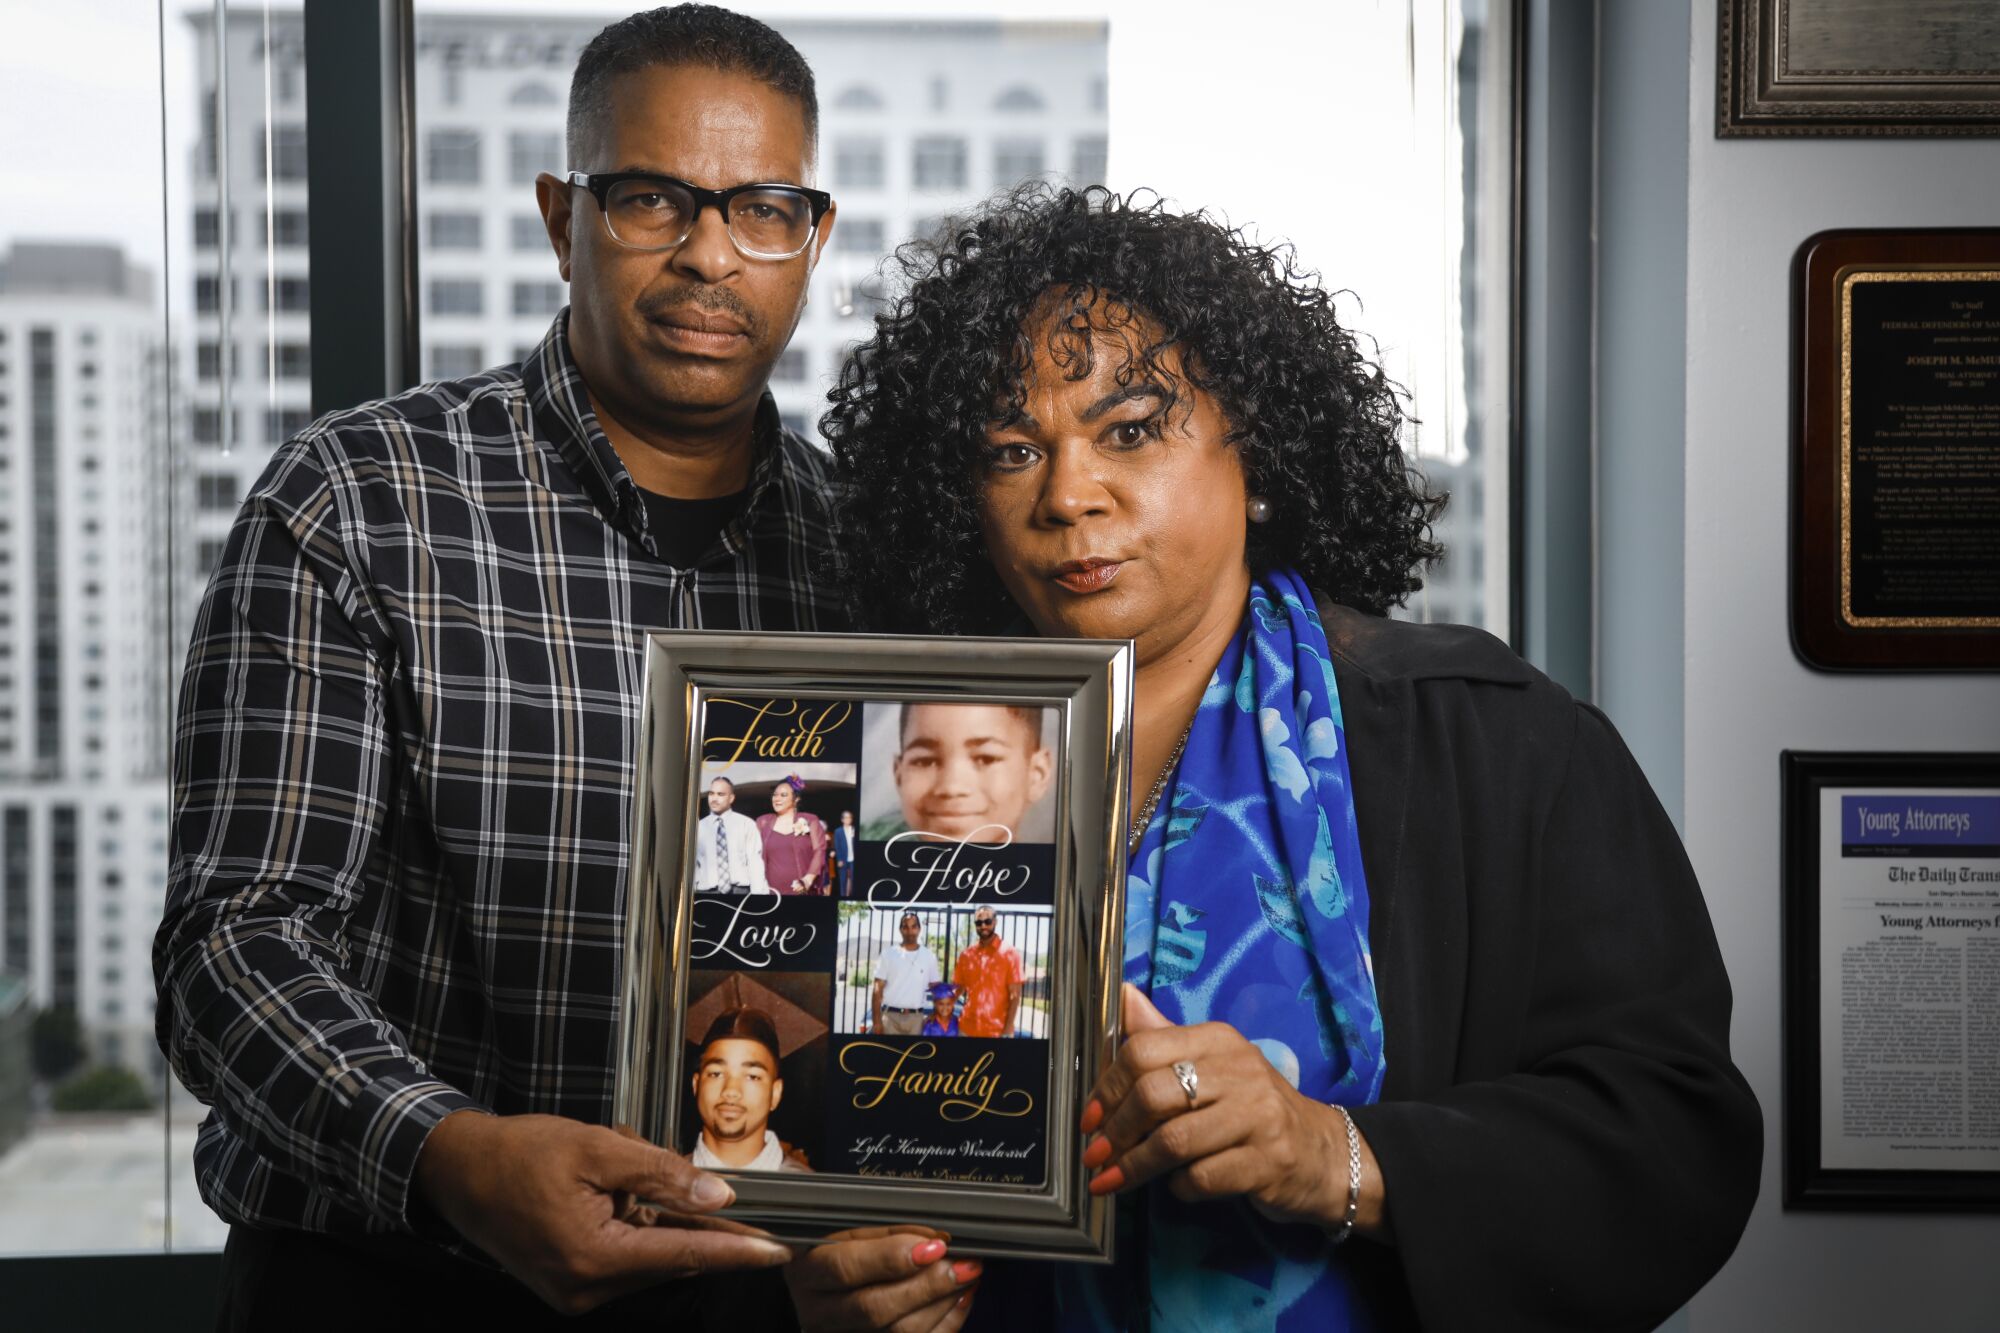 Edward Woodward, left, and his ex-wife, Bessie Woodward, right, hold a framed photo collage of their son, Lyle Woodward, June 26, 2019 in San Diego, California, who died while in San Diego County Jail.